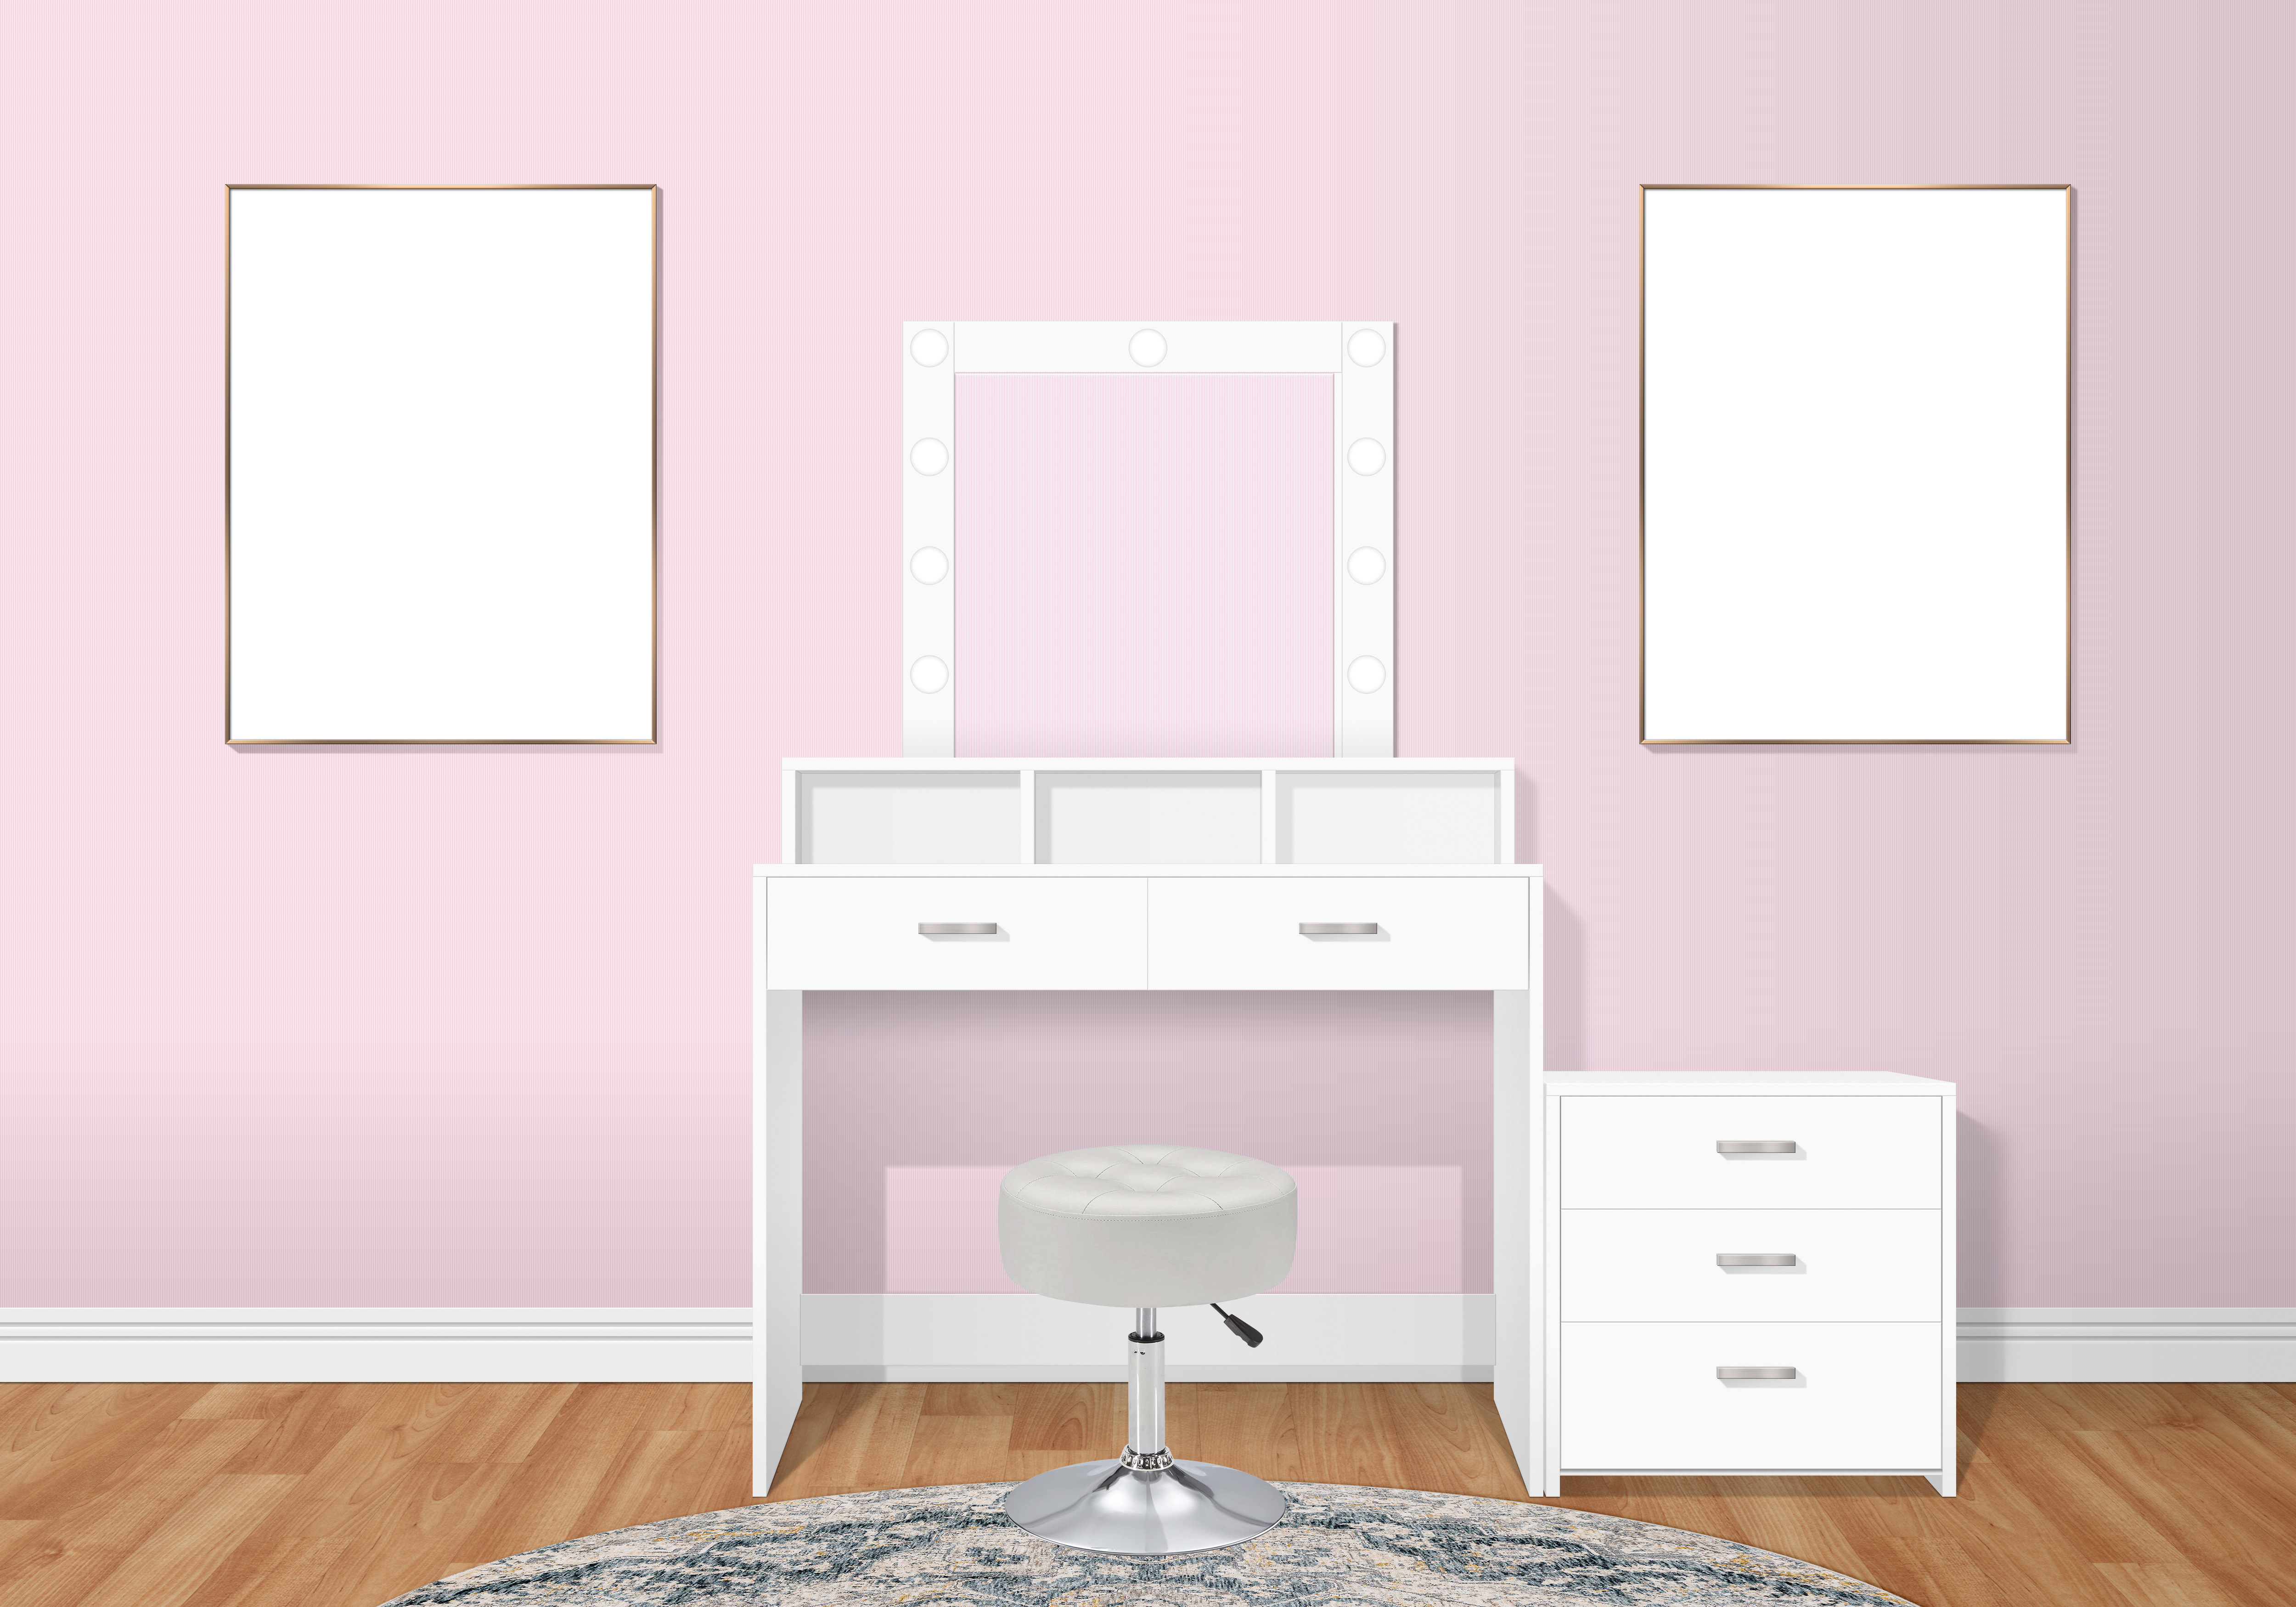 General 5000x3500 vanity table picture frames interior interior design wooden floor pink wall stools pink wall